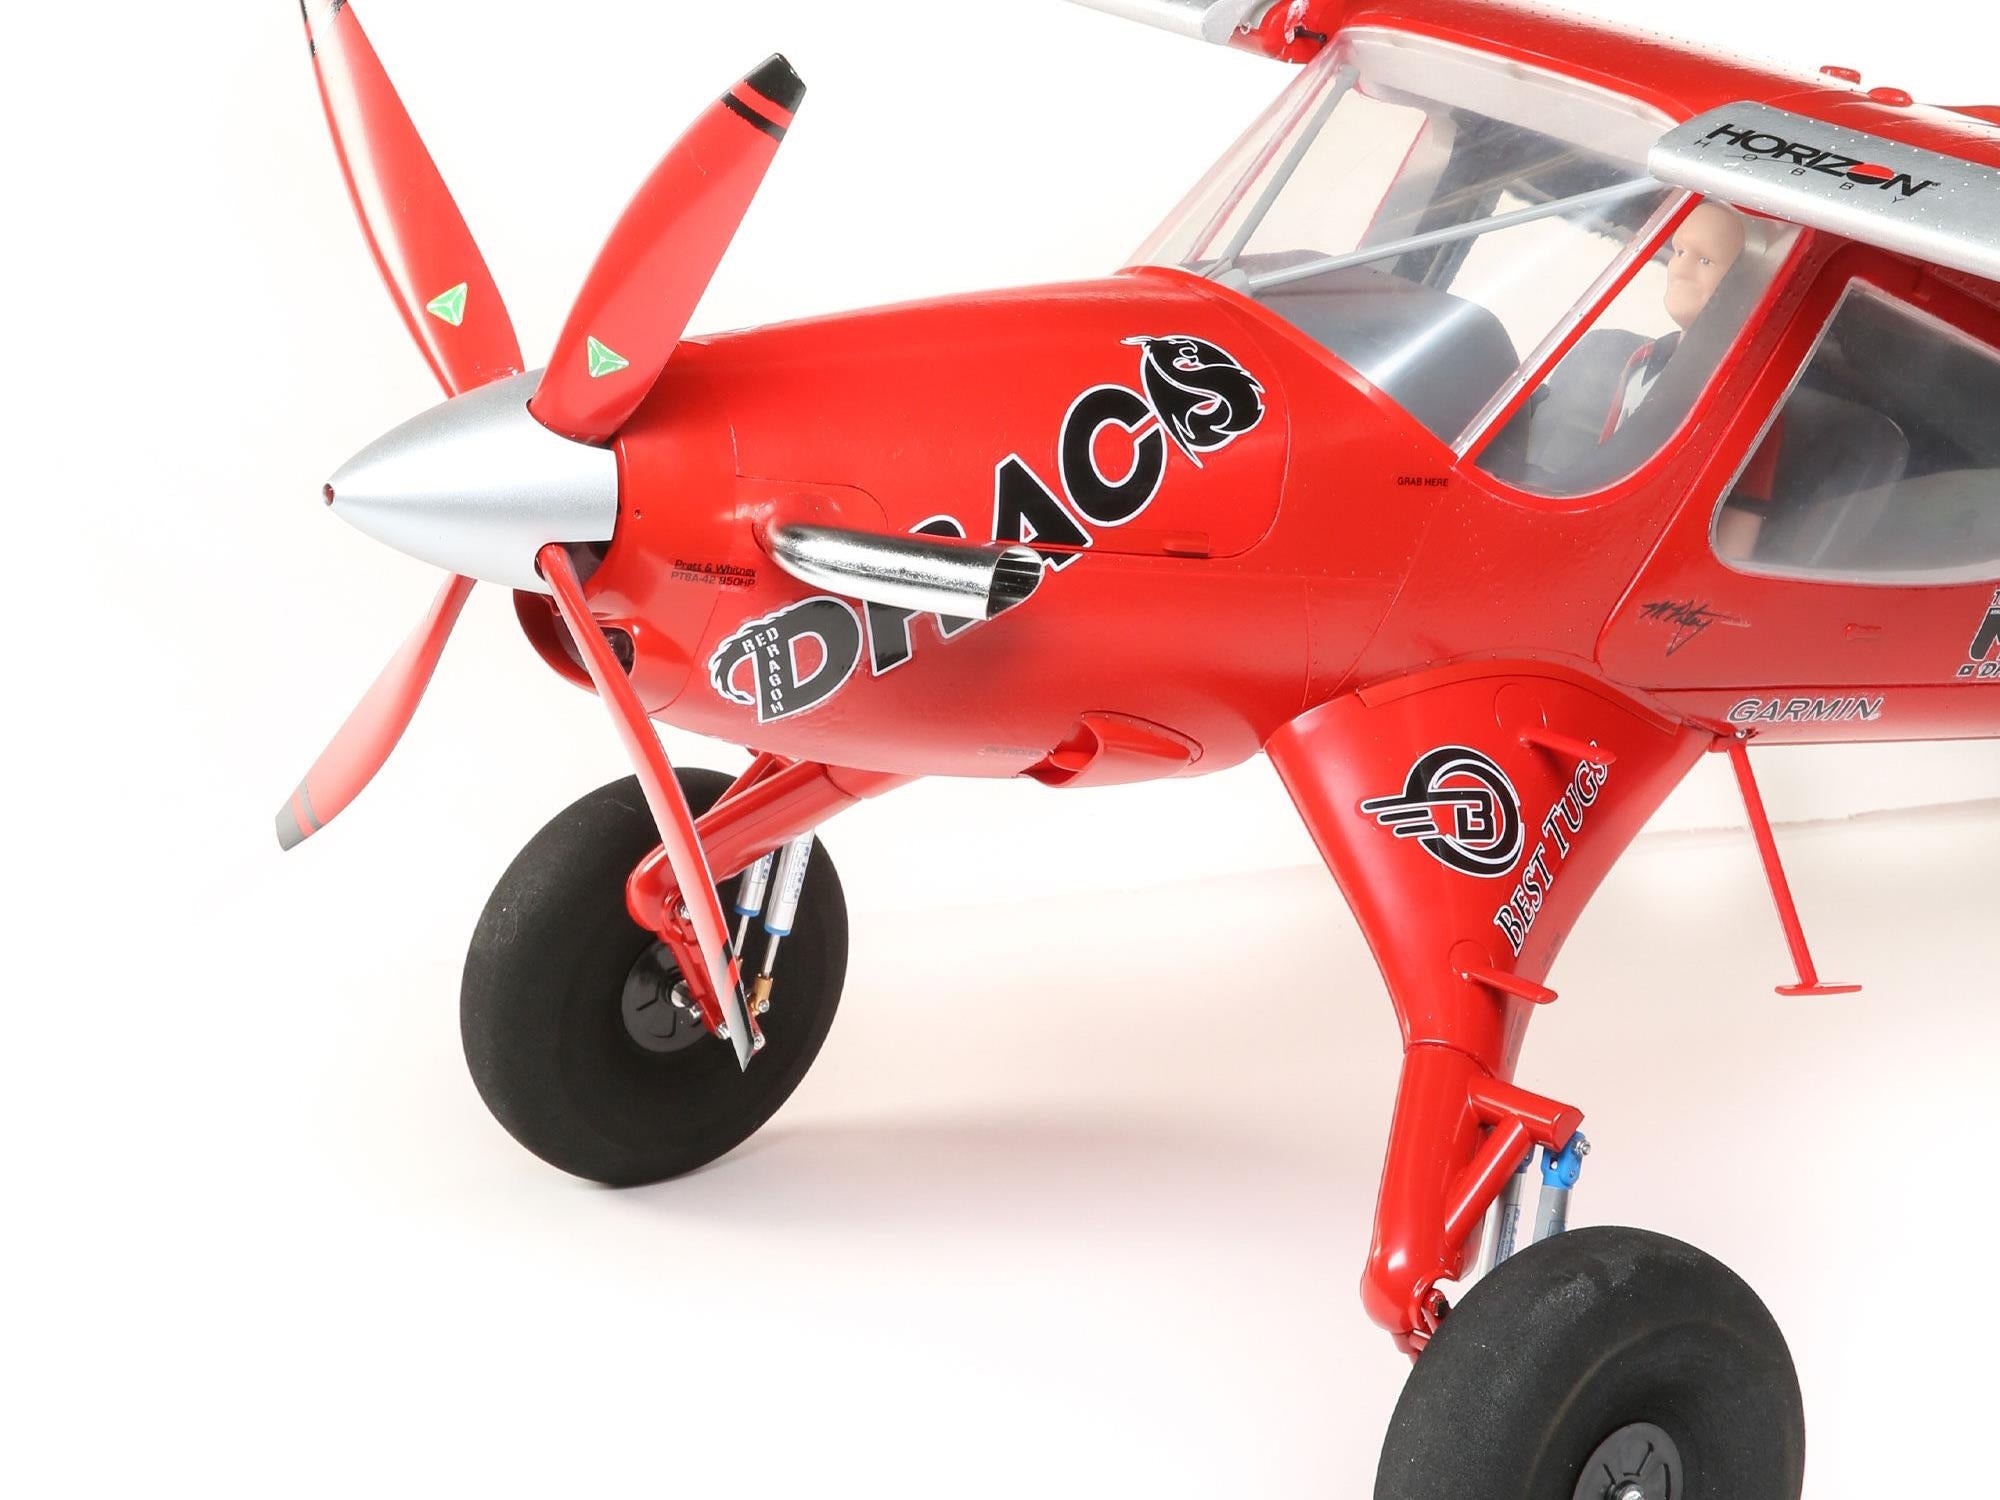 E-Flite Draco 2.0m Smart BNF Basic with AS3X and SAFE EFL12550